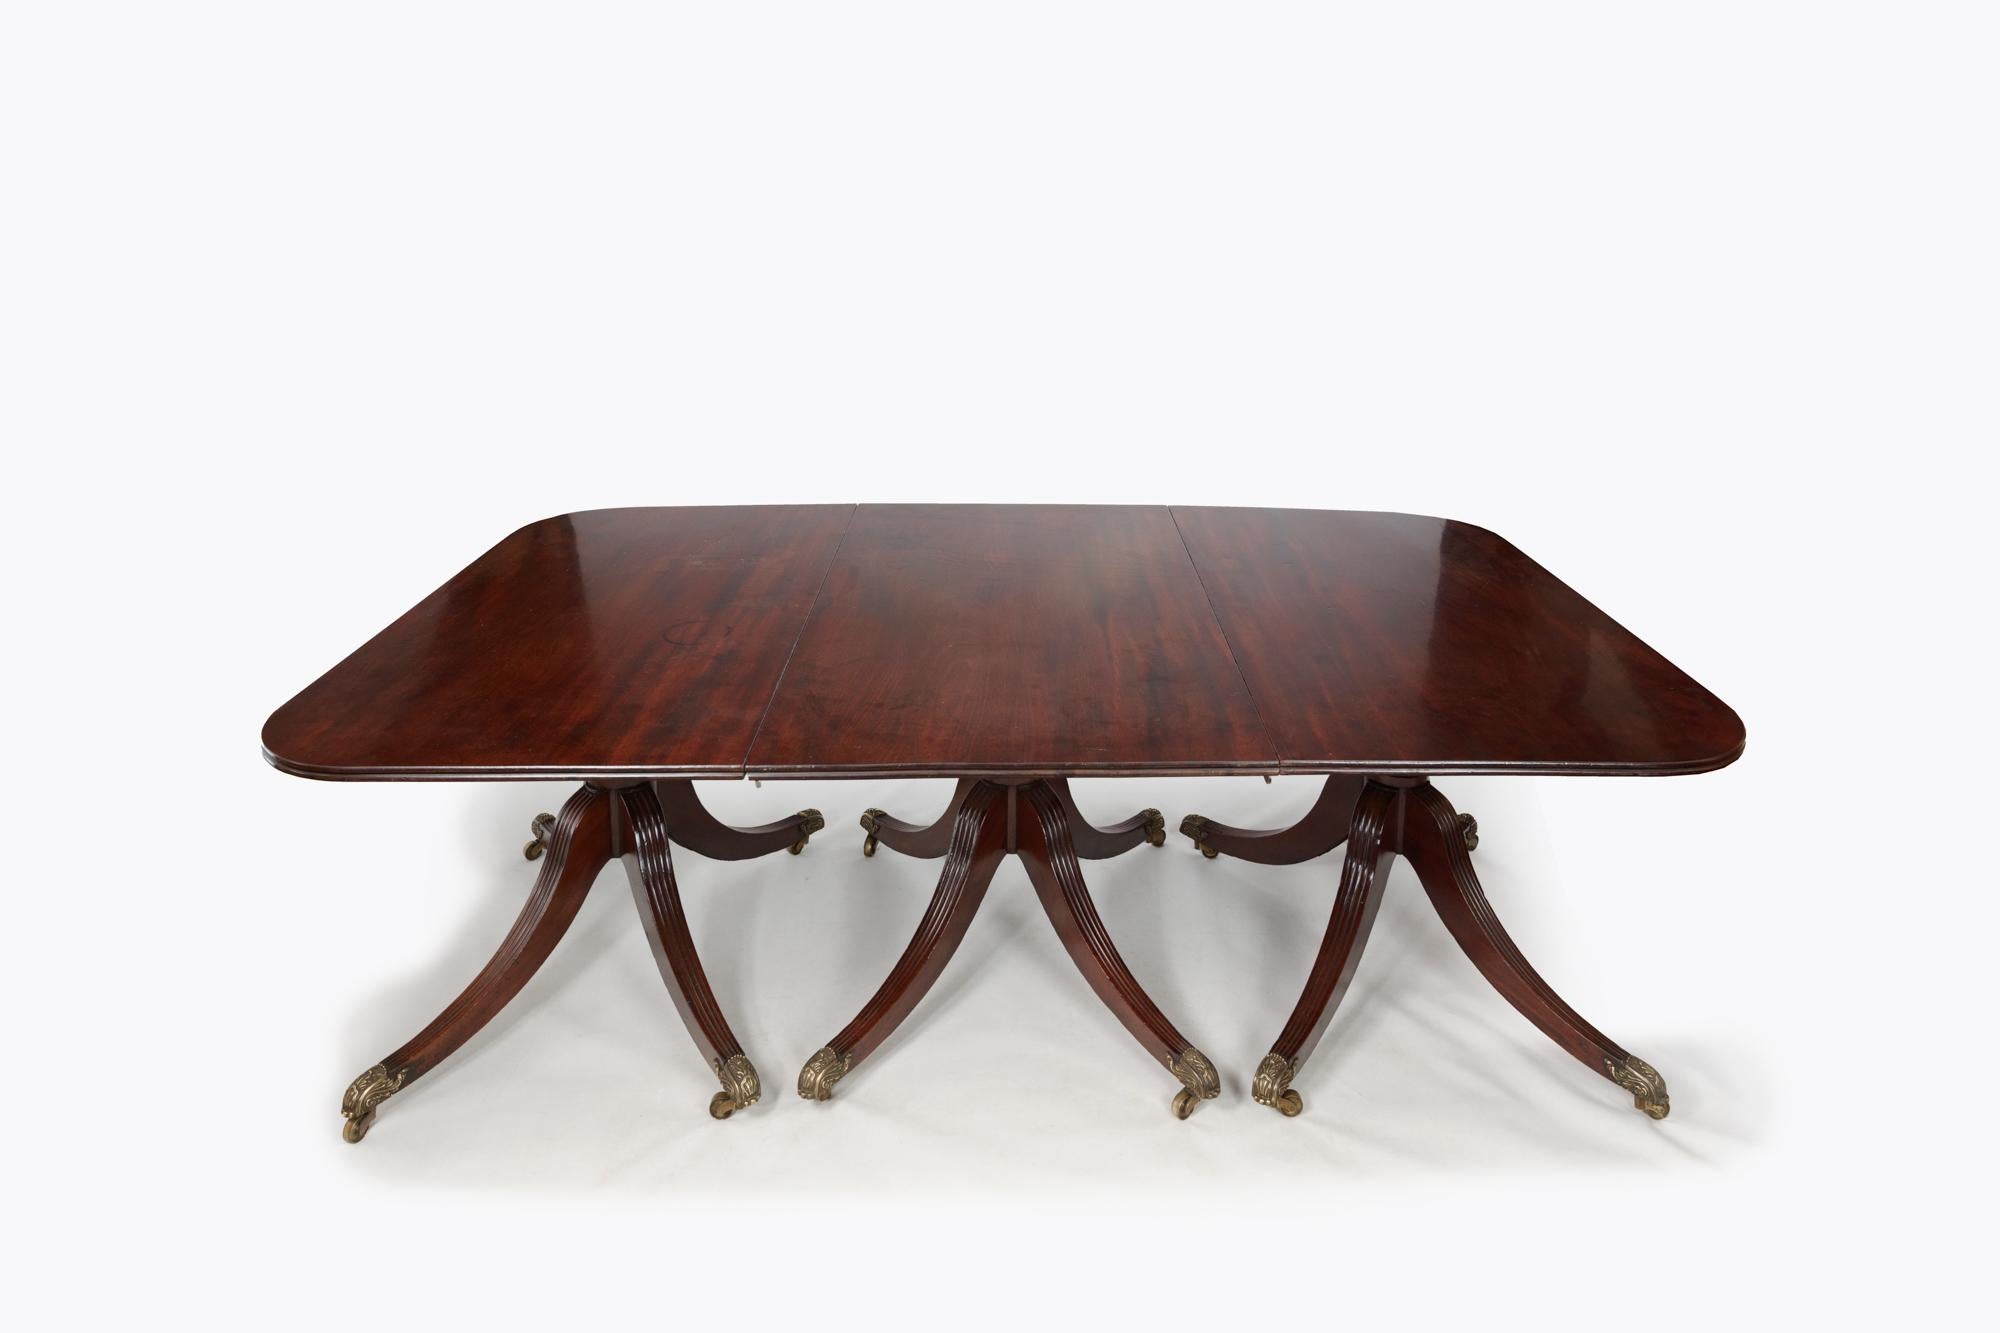 Mahogany Early 19th Century English Regency Dining Table For Sale